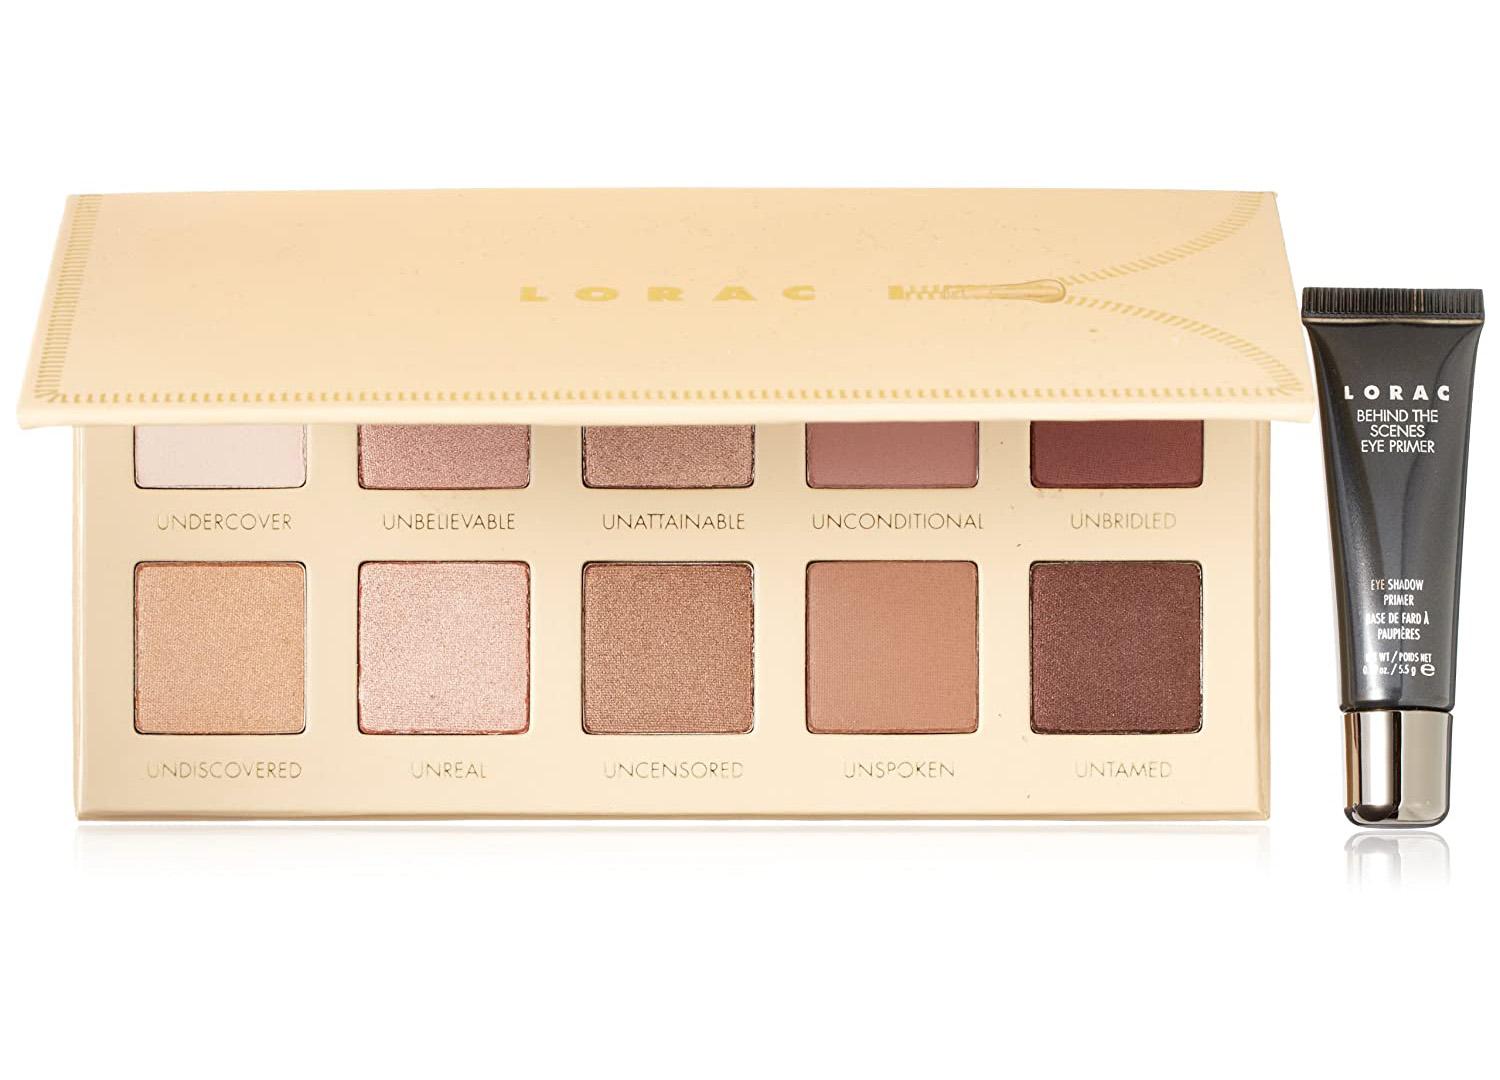 10-Shade LORAC Unzipped Eyeshadow Palette with Primer for $17.50